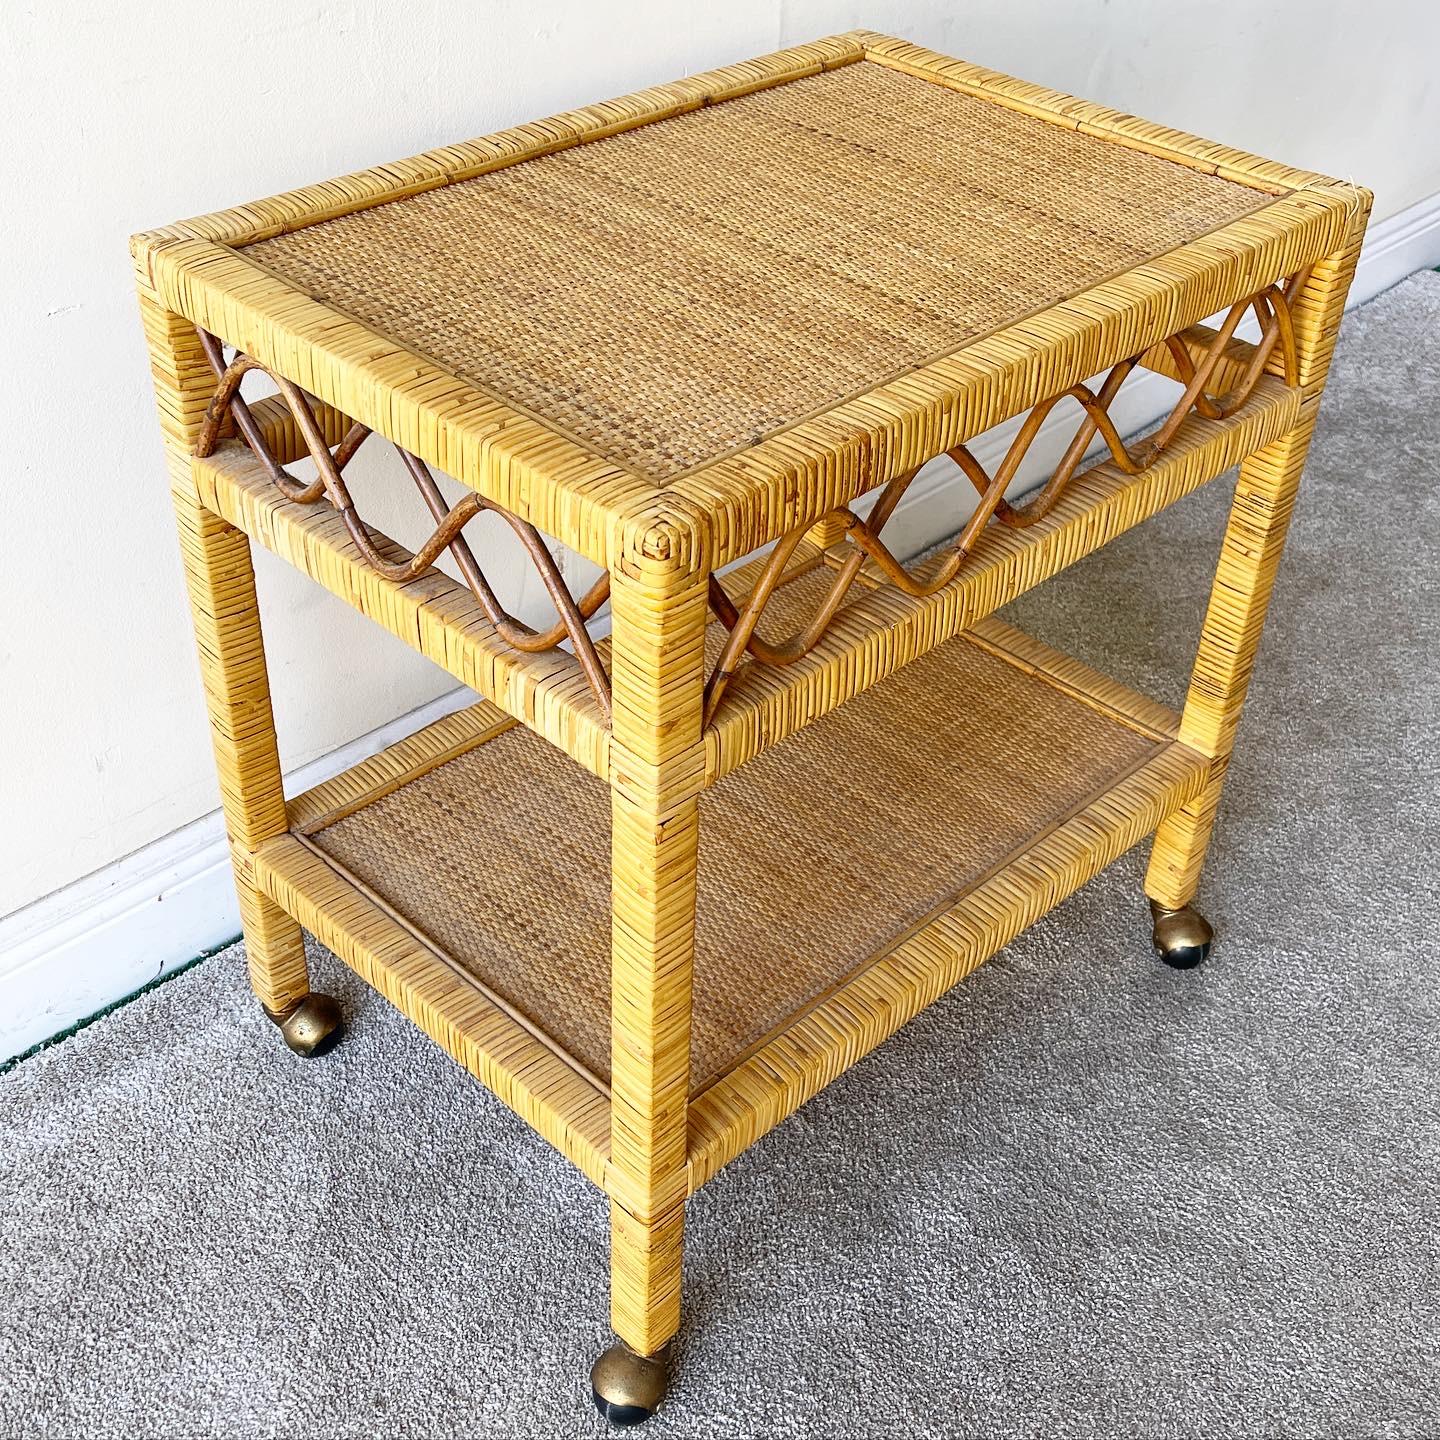 Amazing rattan cart with a wicker top and bottom tier. Cart glides smoothly on spherical wheels.

Additional Information:
Material: Rattan, Wicker
Color: Brown
Style: Boho Chic
Time Period: 1980s
Dimension: 26